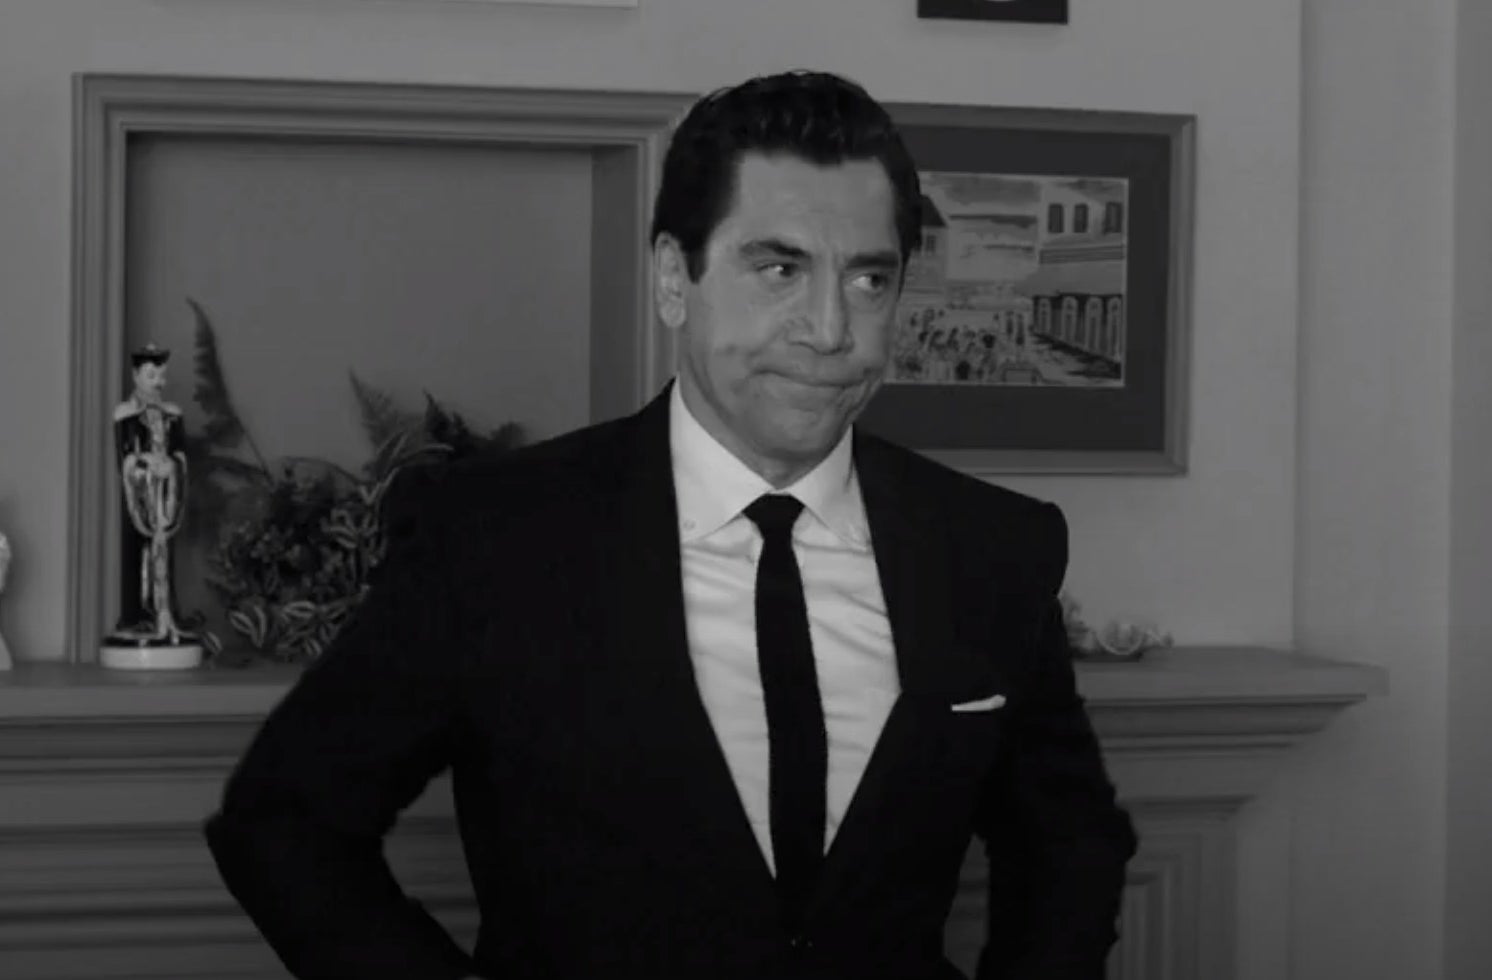 Javier Bardem in a suit and tie as Ricky Ricardo in &quot;Being the Ricardos&quot;